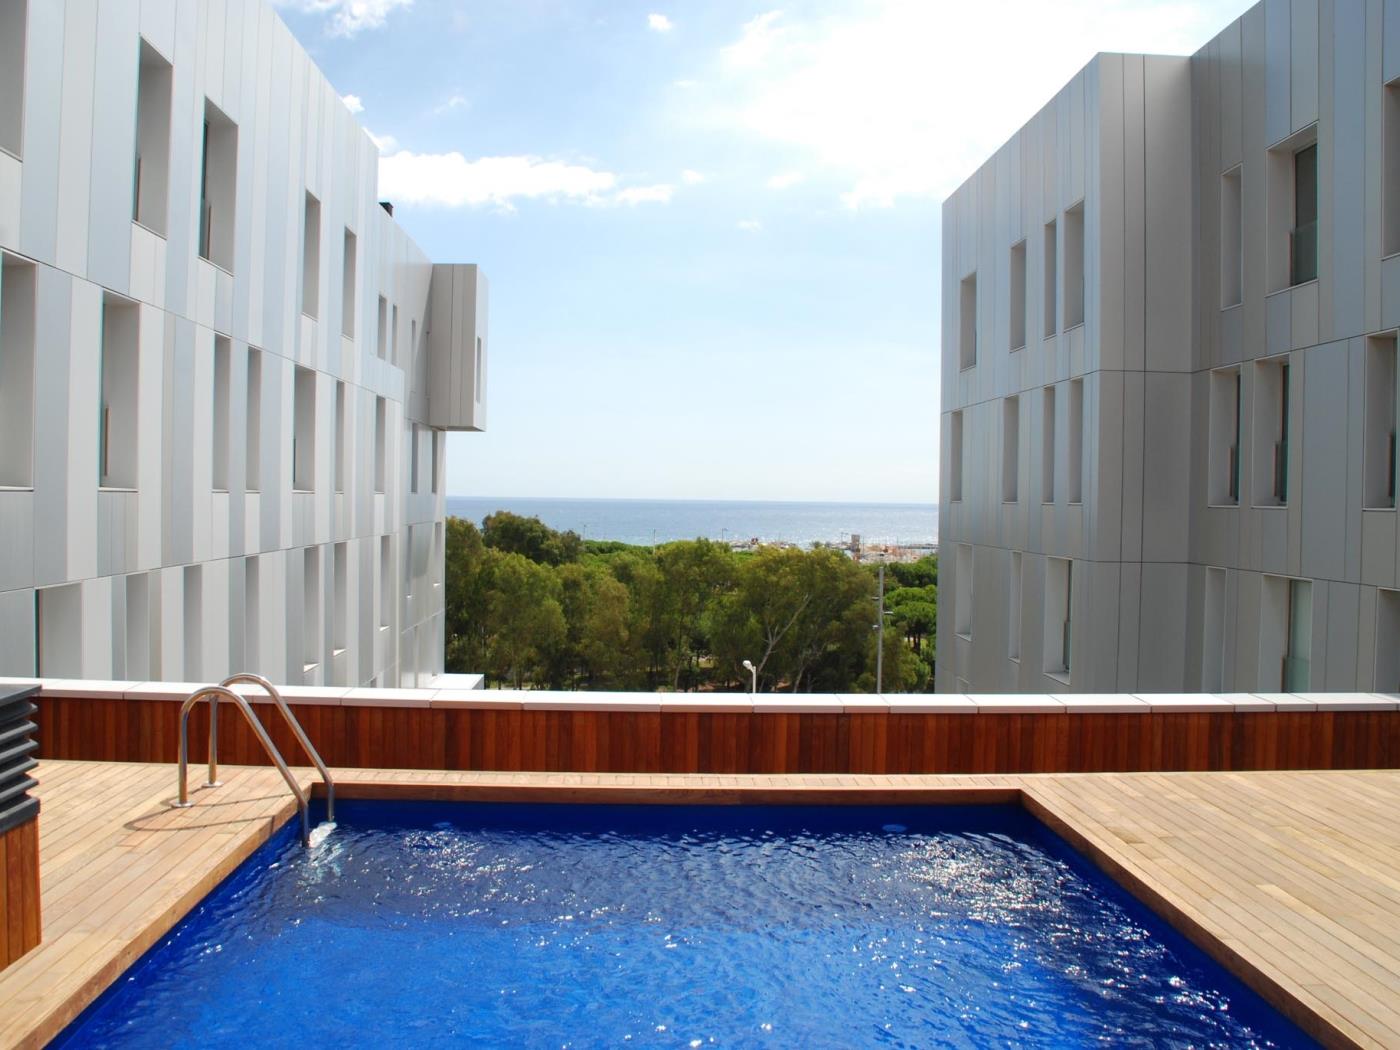 Furnished two-bedroom Apartment with share pool close to Beach - My Space Barcelona Apartments